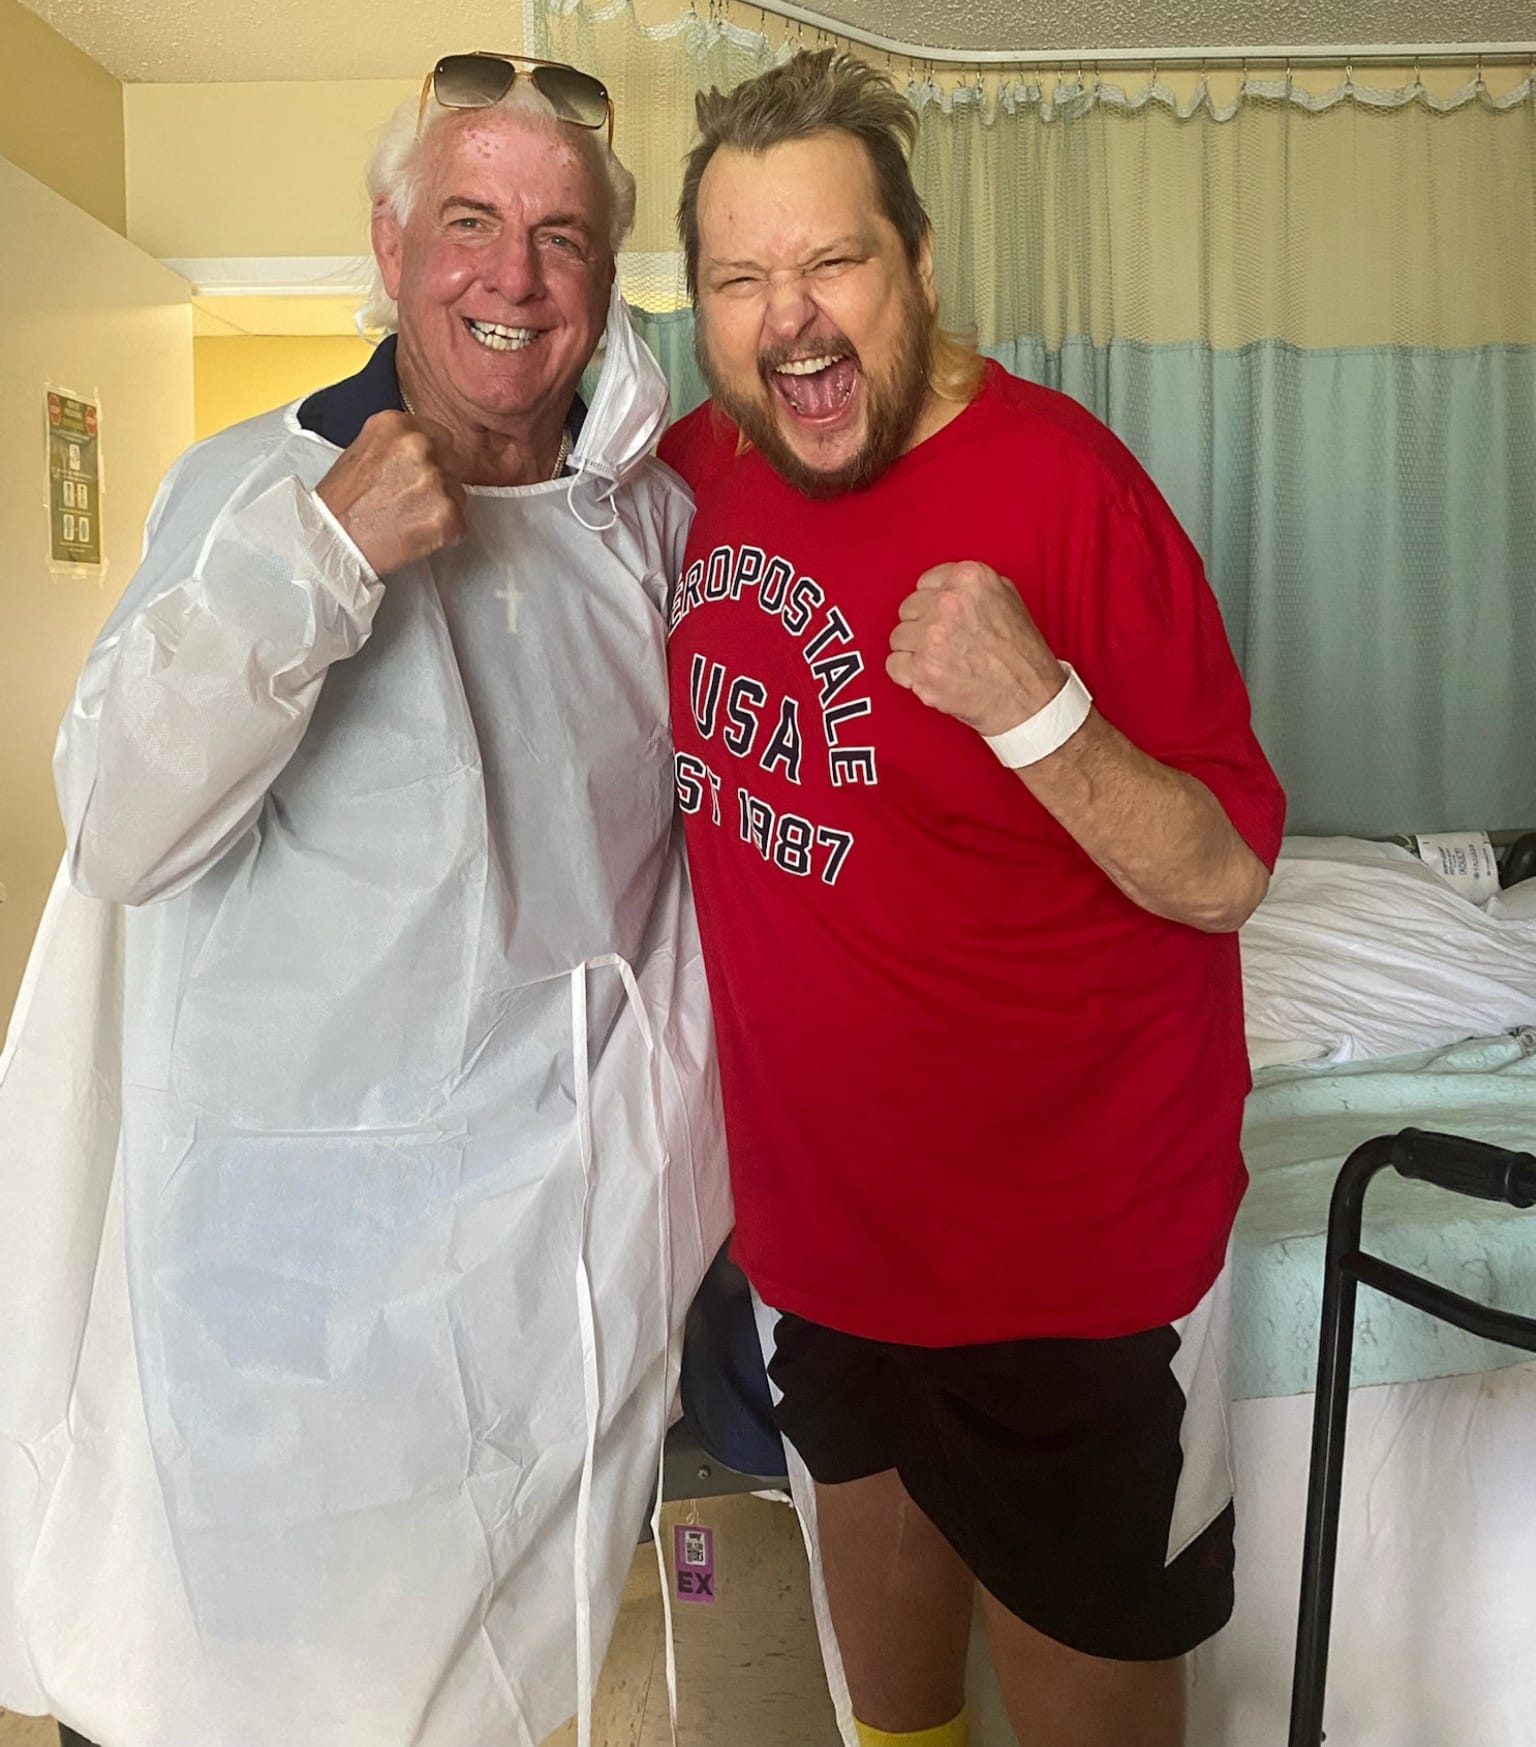 Ric Flair visits Brian Knobbs who has lost over 60 pounds October 2021